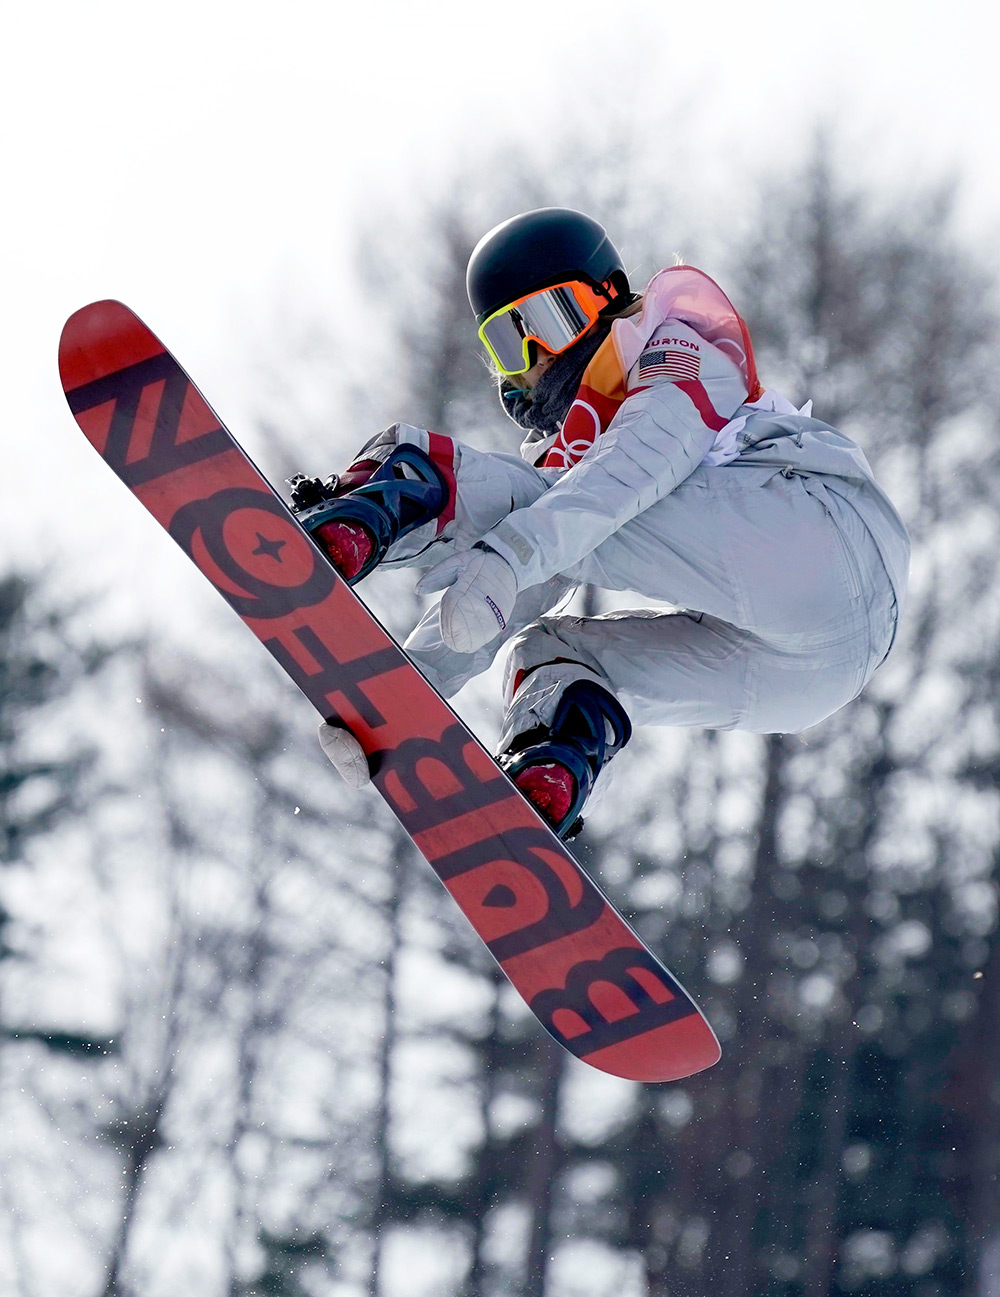 Chloe Kim: Photos Of The USA Olympic Winter Games Snowboarder & Gold Medalist